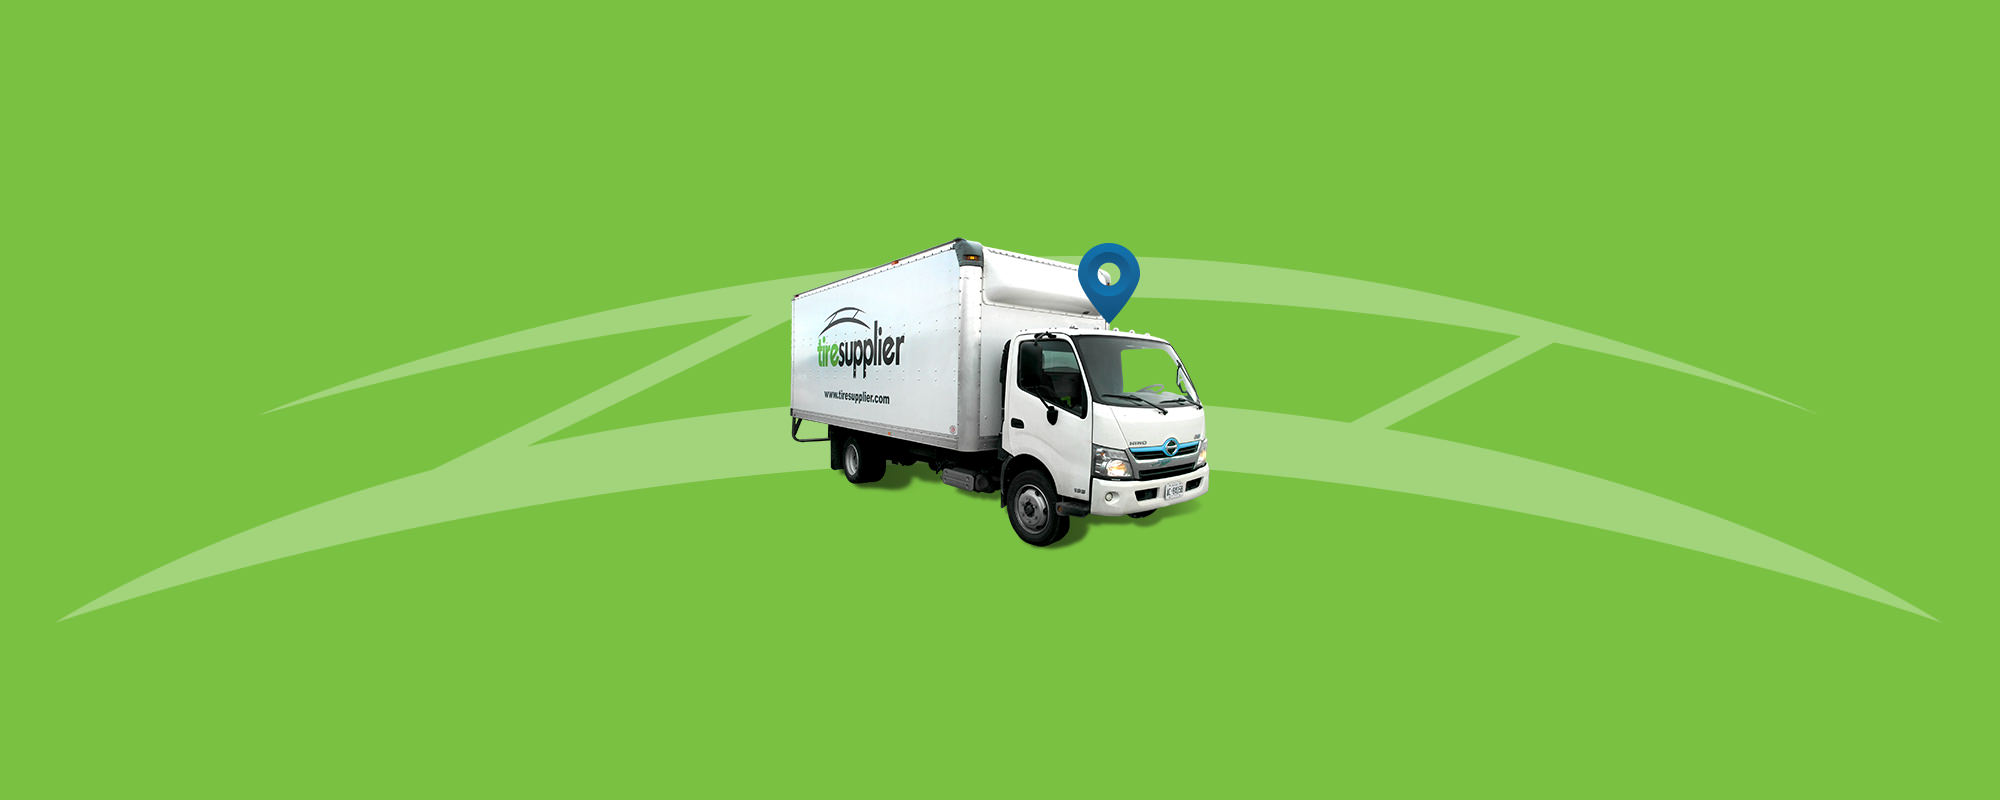 White Tire Supplier truck on a green background with Tire Supplier logo behind it